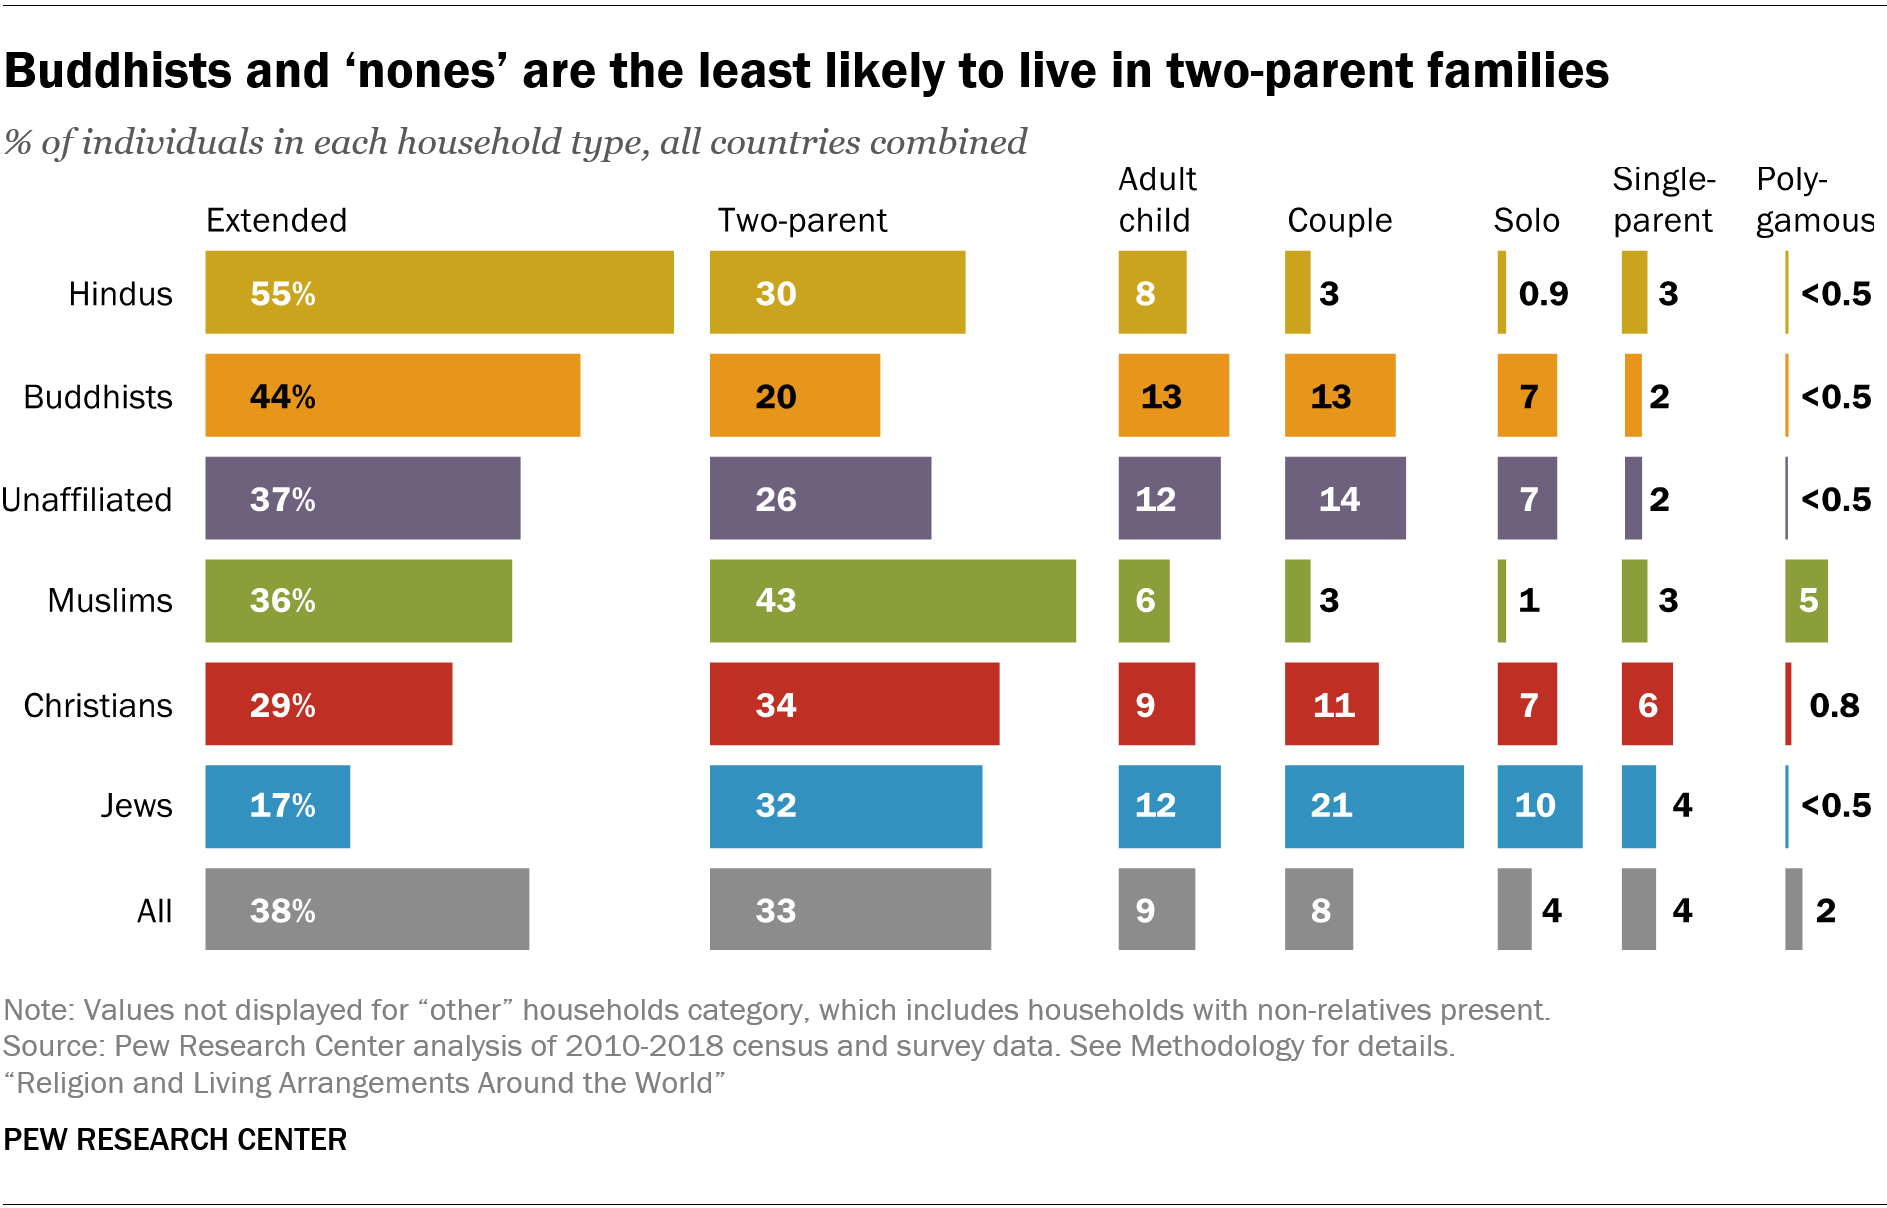 Buddhists and 'nones' are the least likely to live in two-parent families